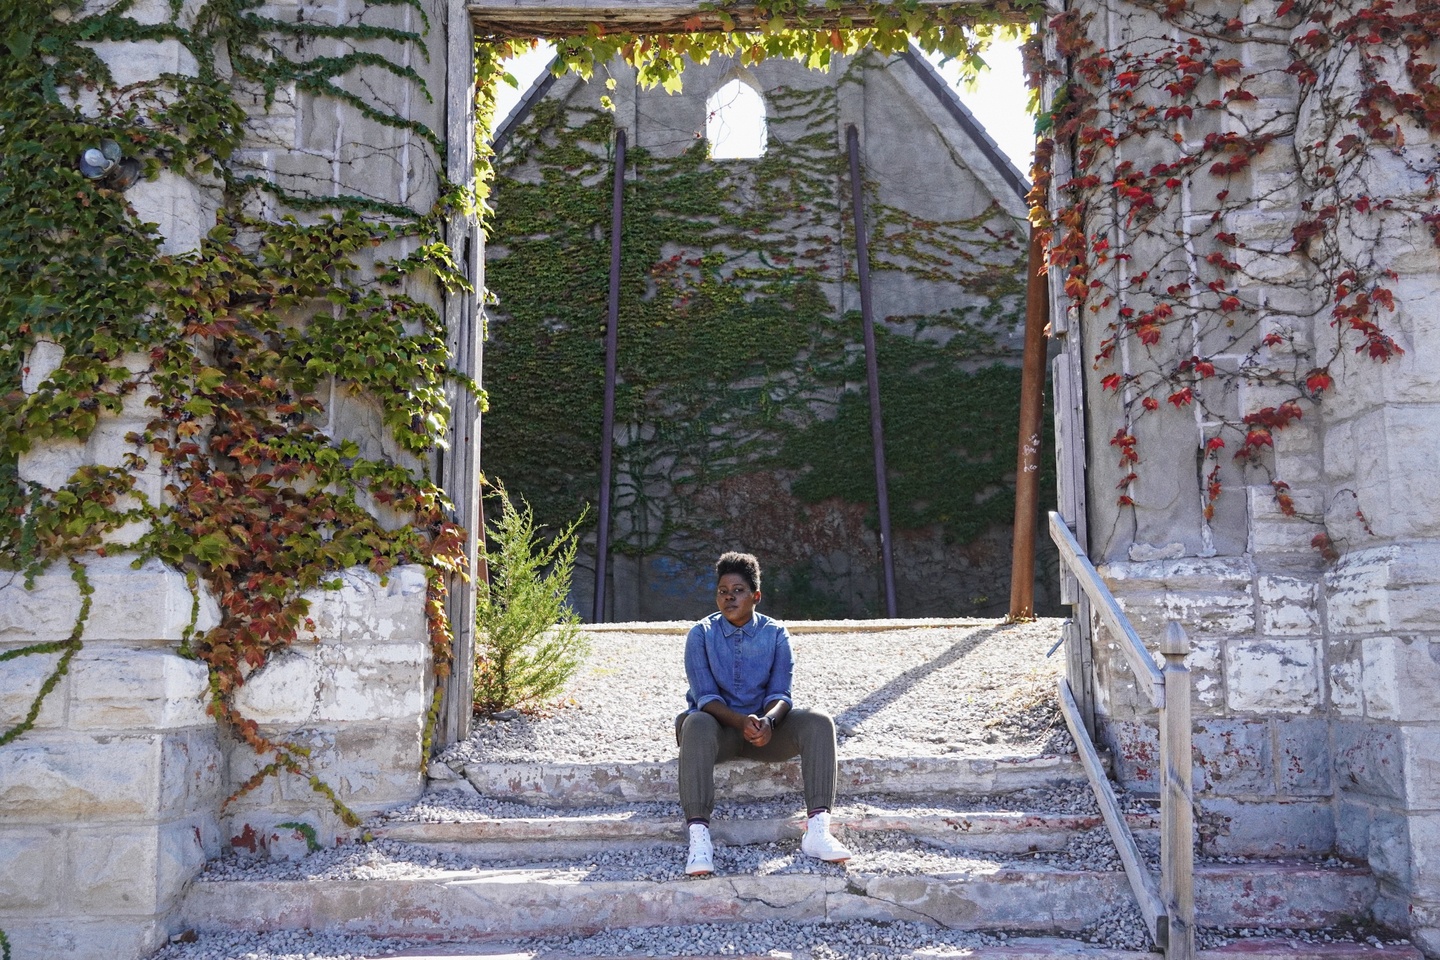 A person sits on the steps of a building with gray walls covered in ivy.